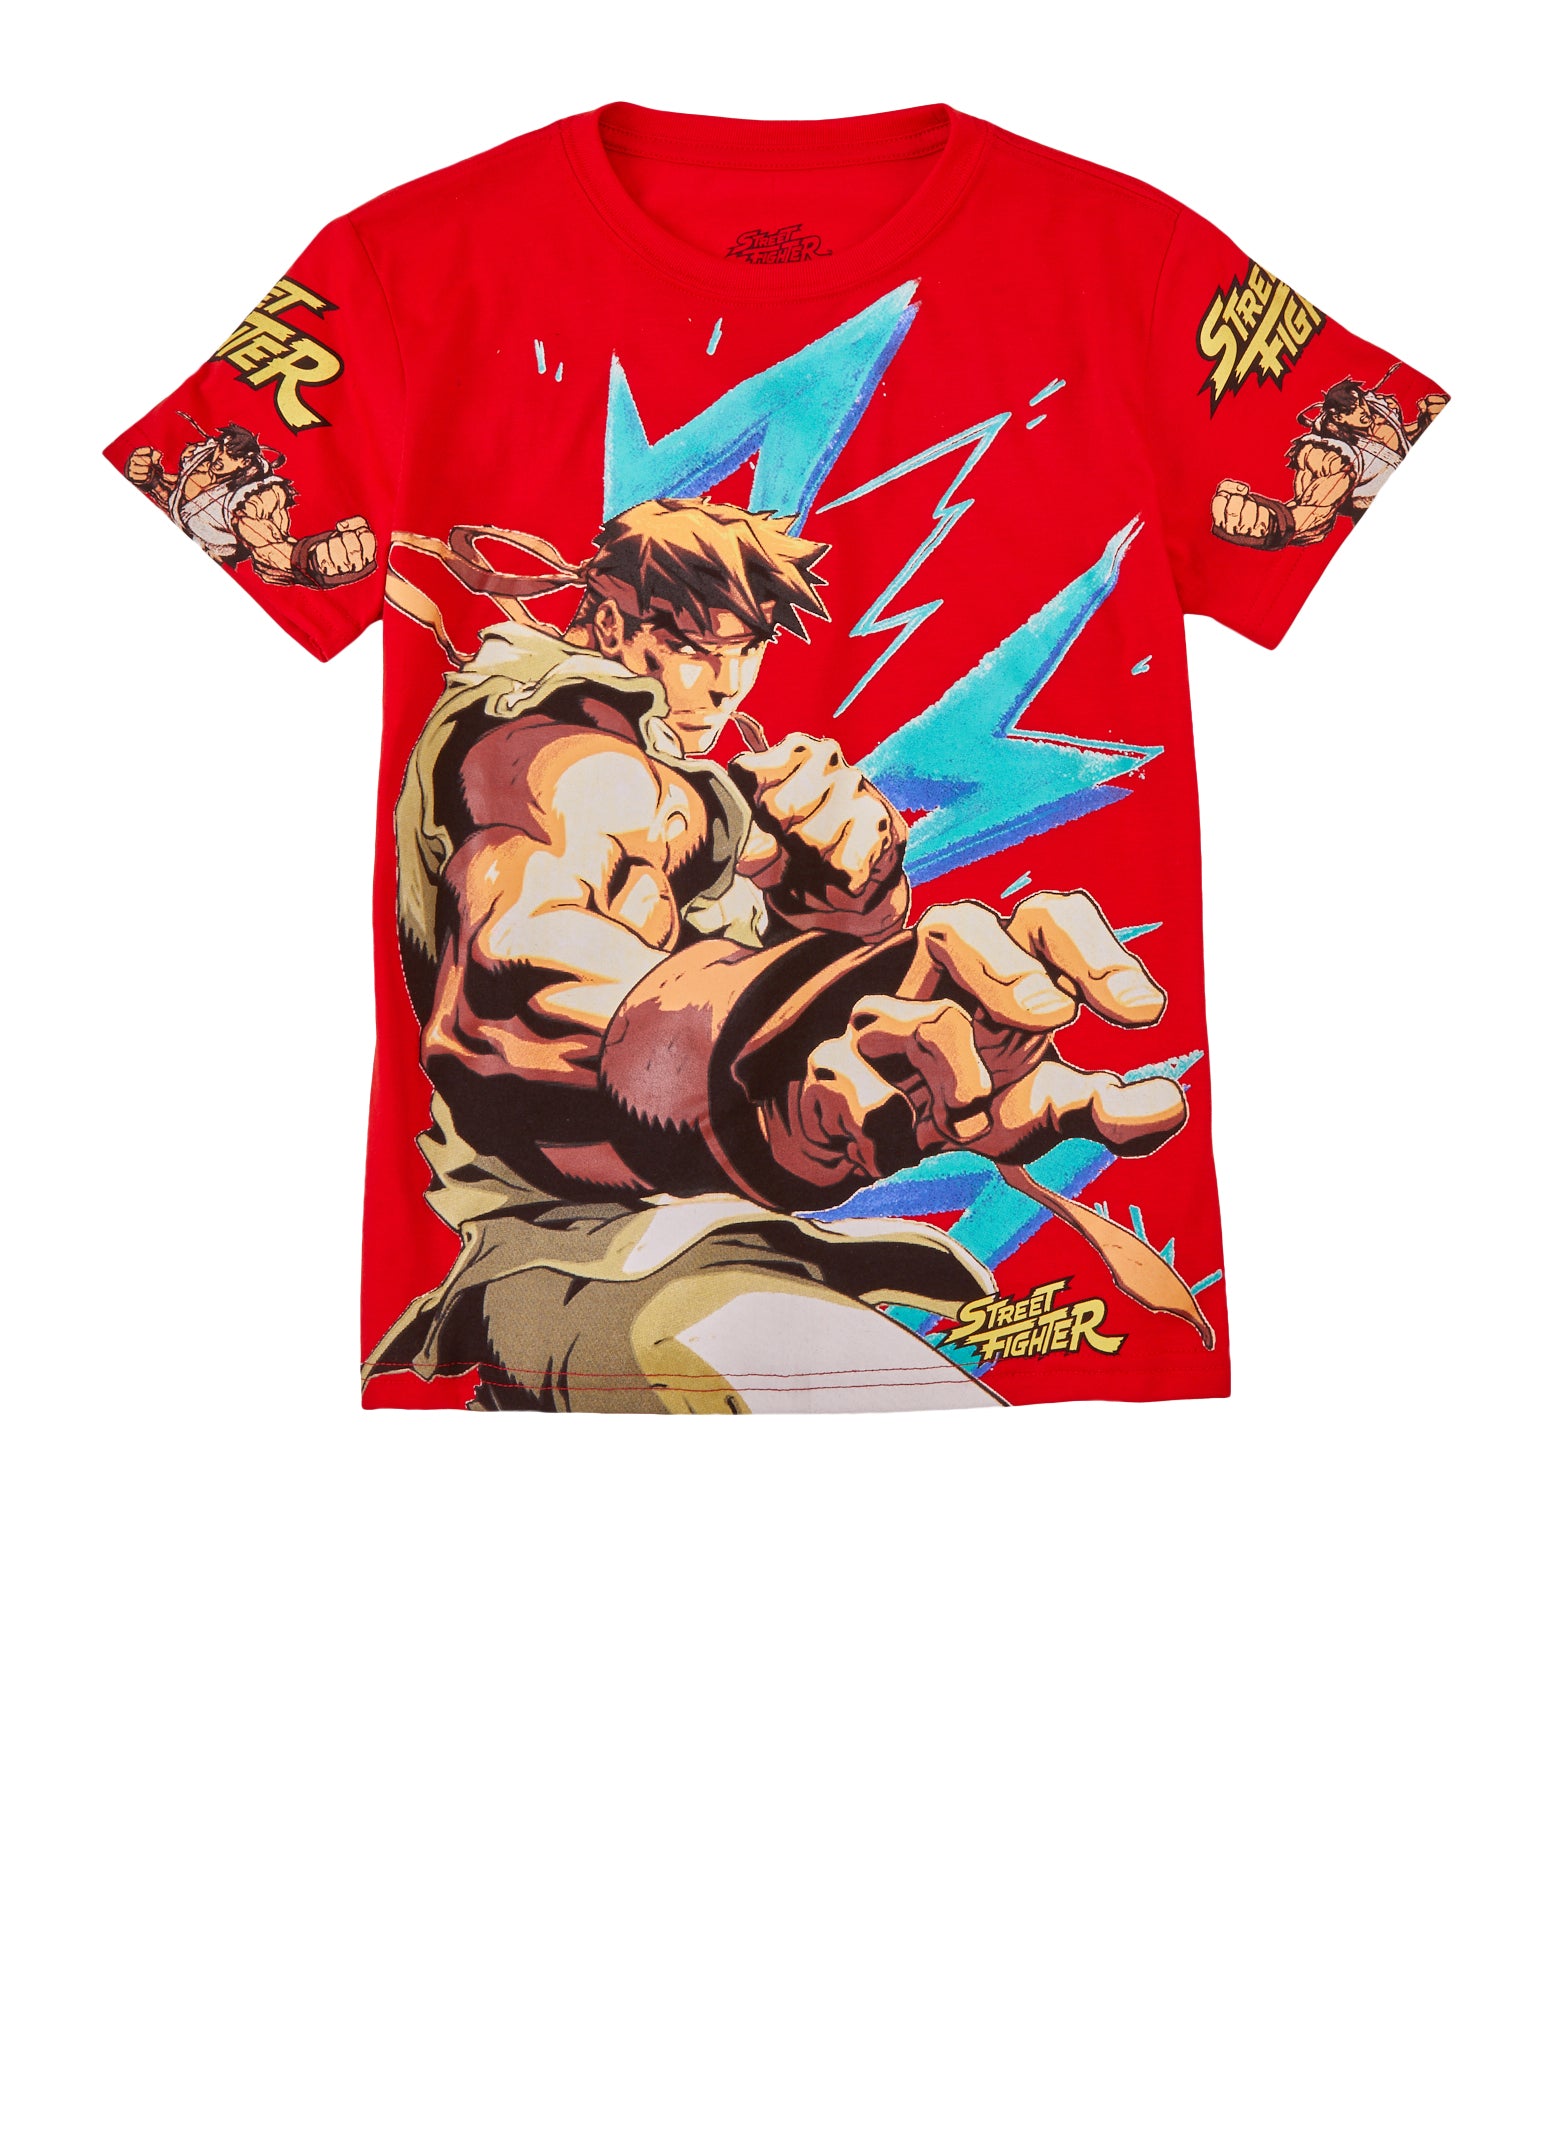 Boys Street Fighter Graphic Crew Neck Tee, Red, Size XL